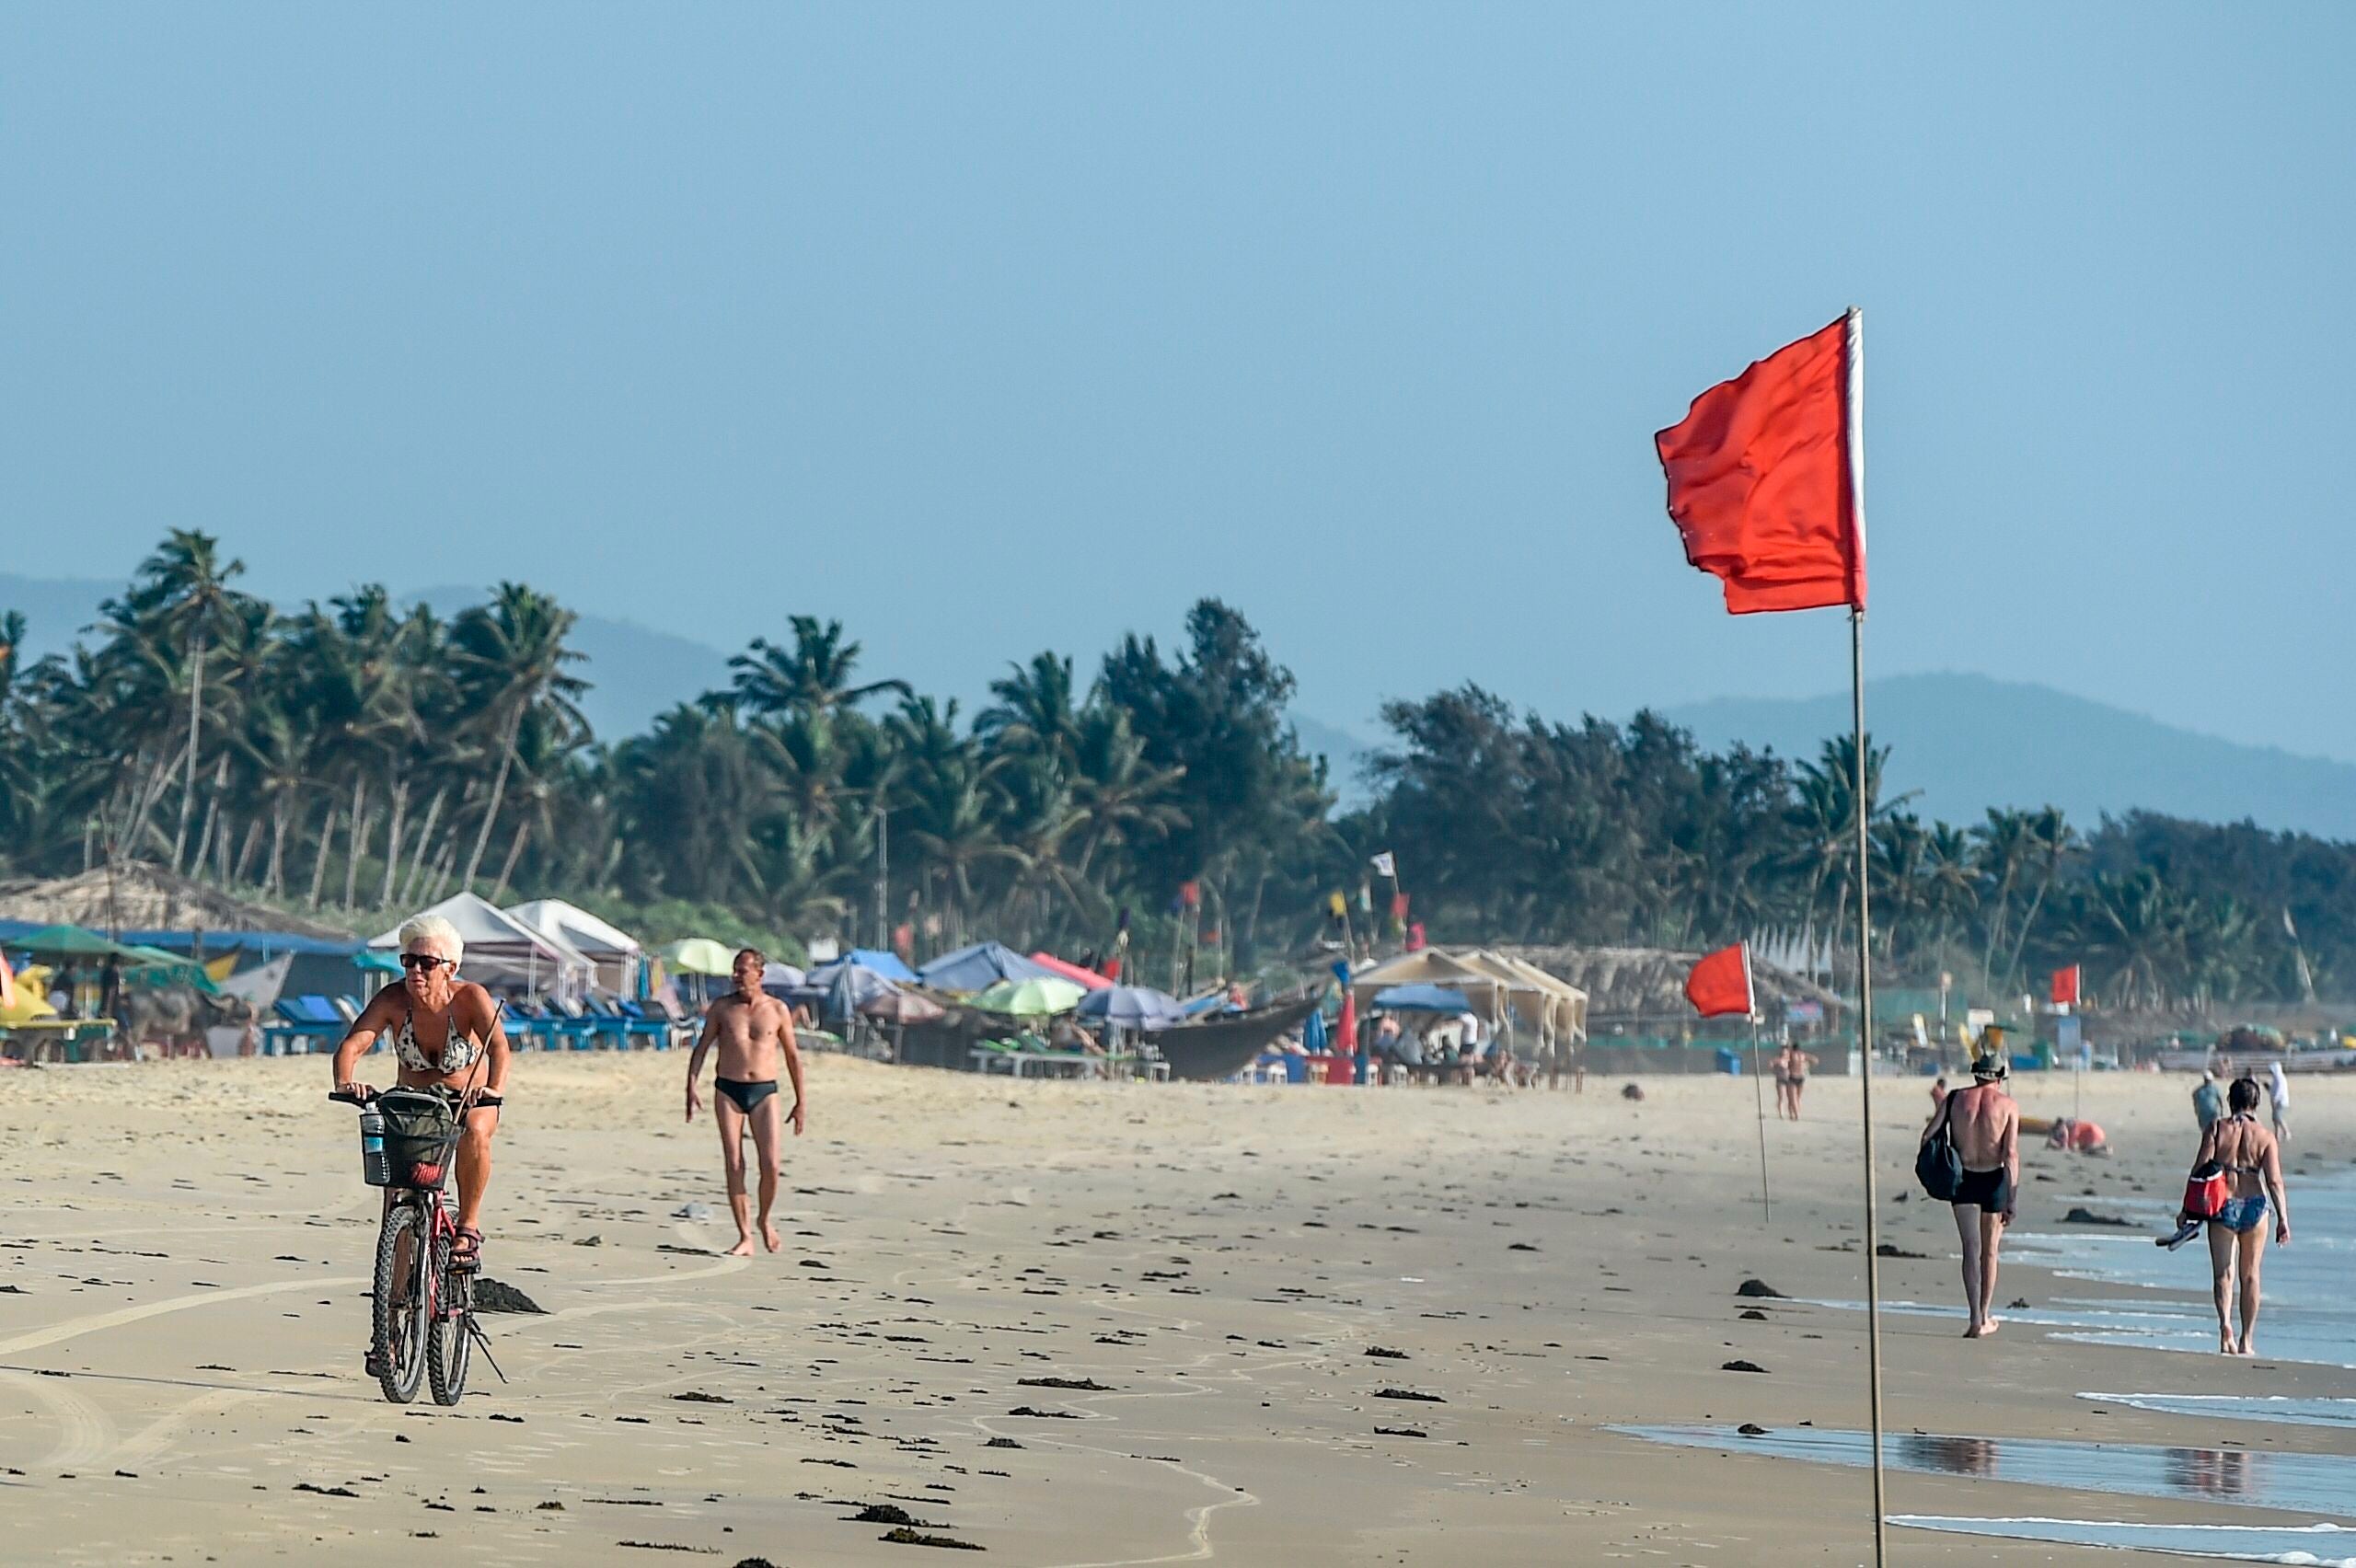 The 72-year-old Briton died at a beach in the popular tourist destination of Goa in India